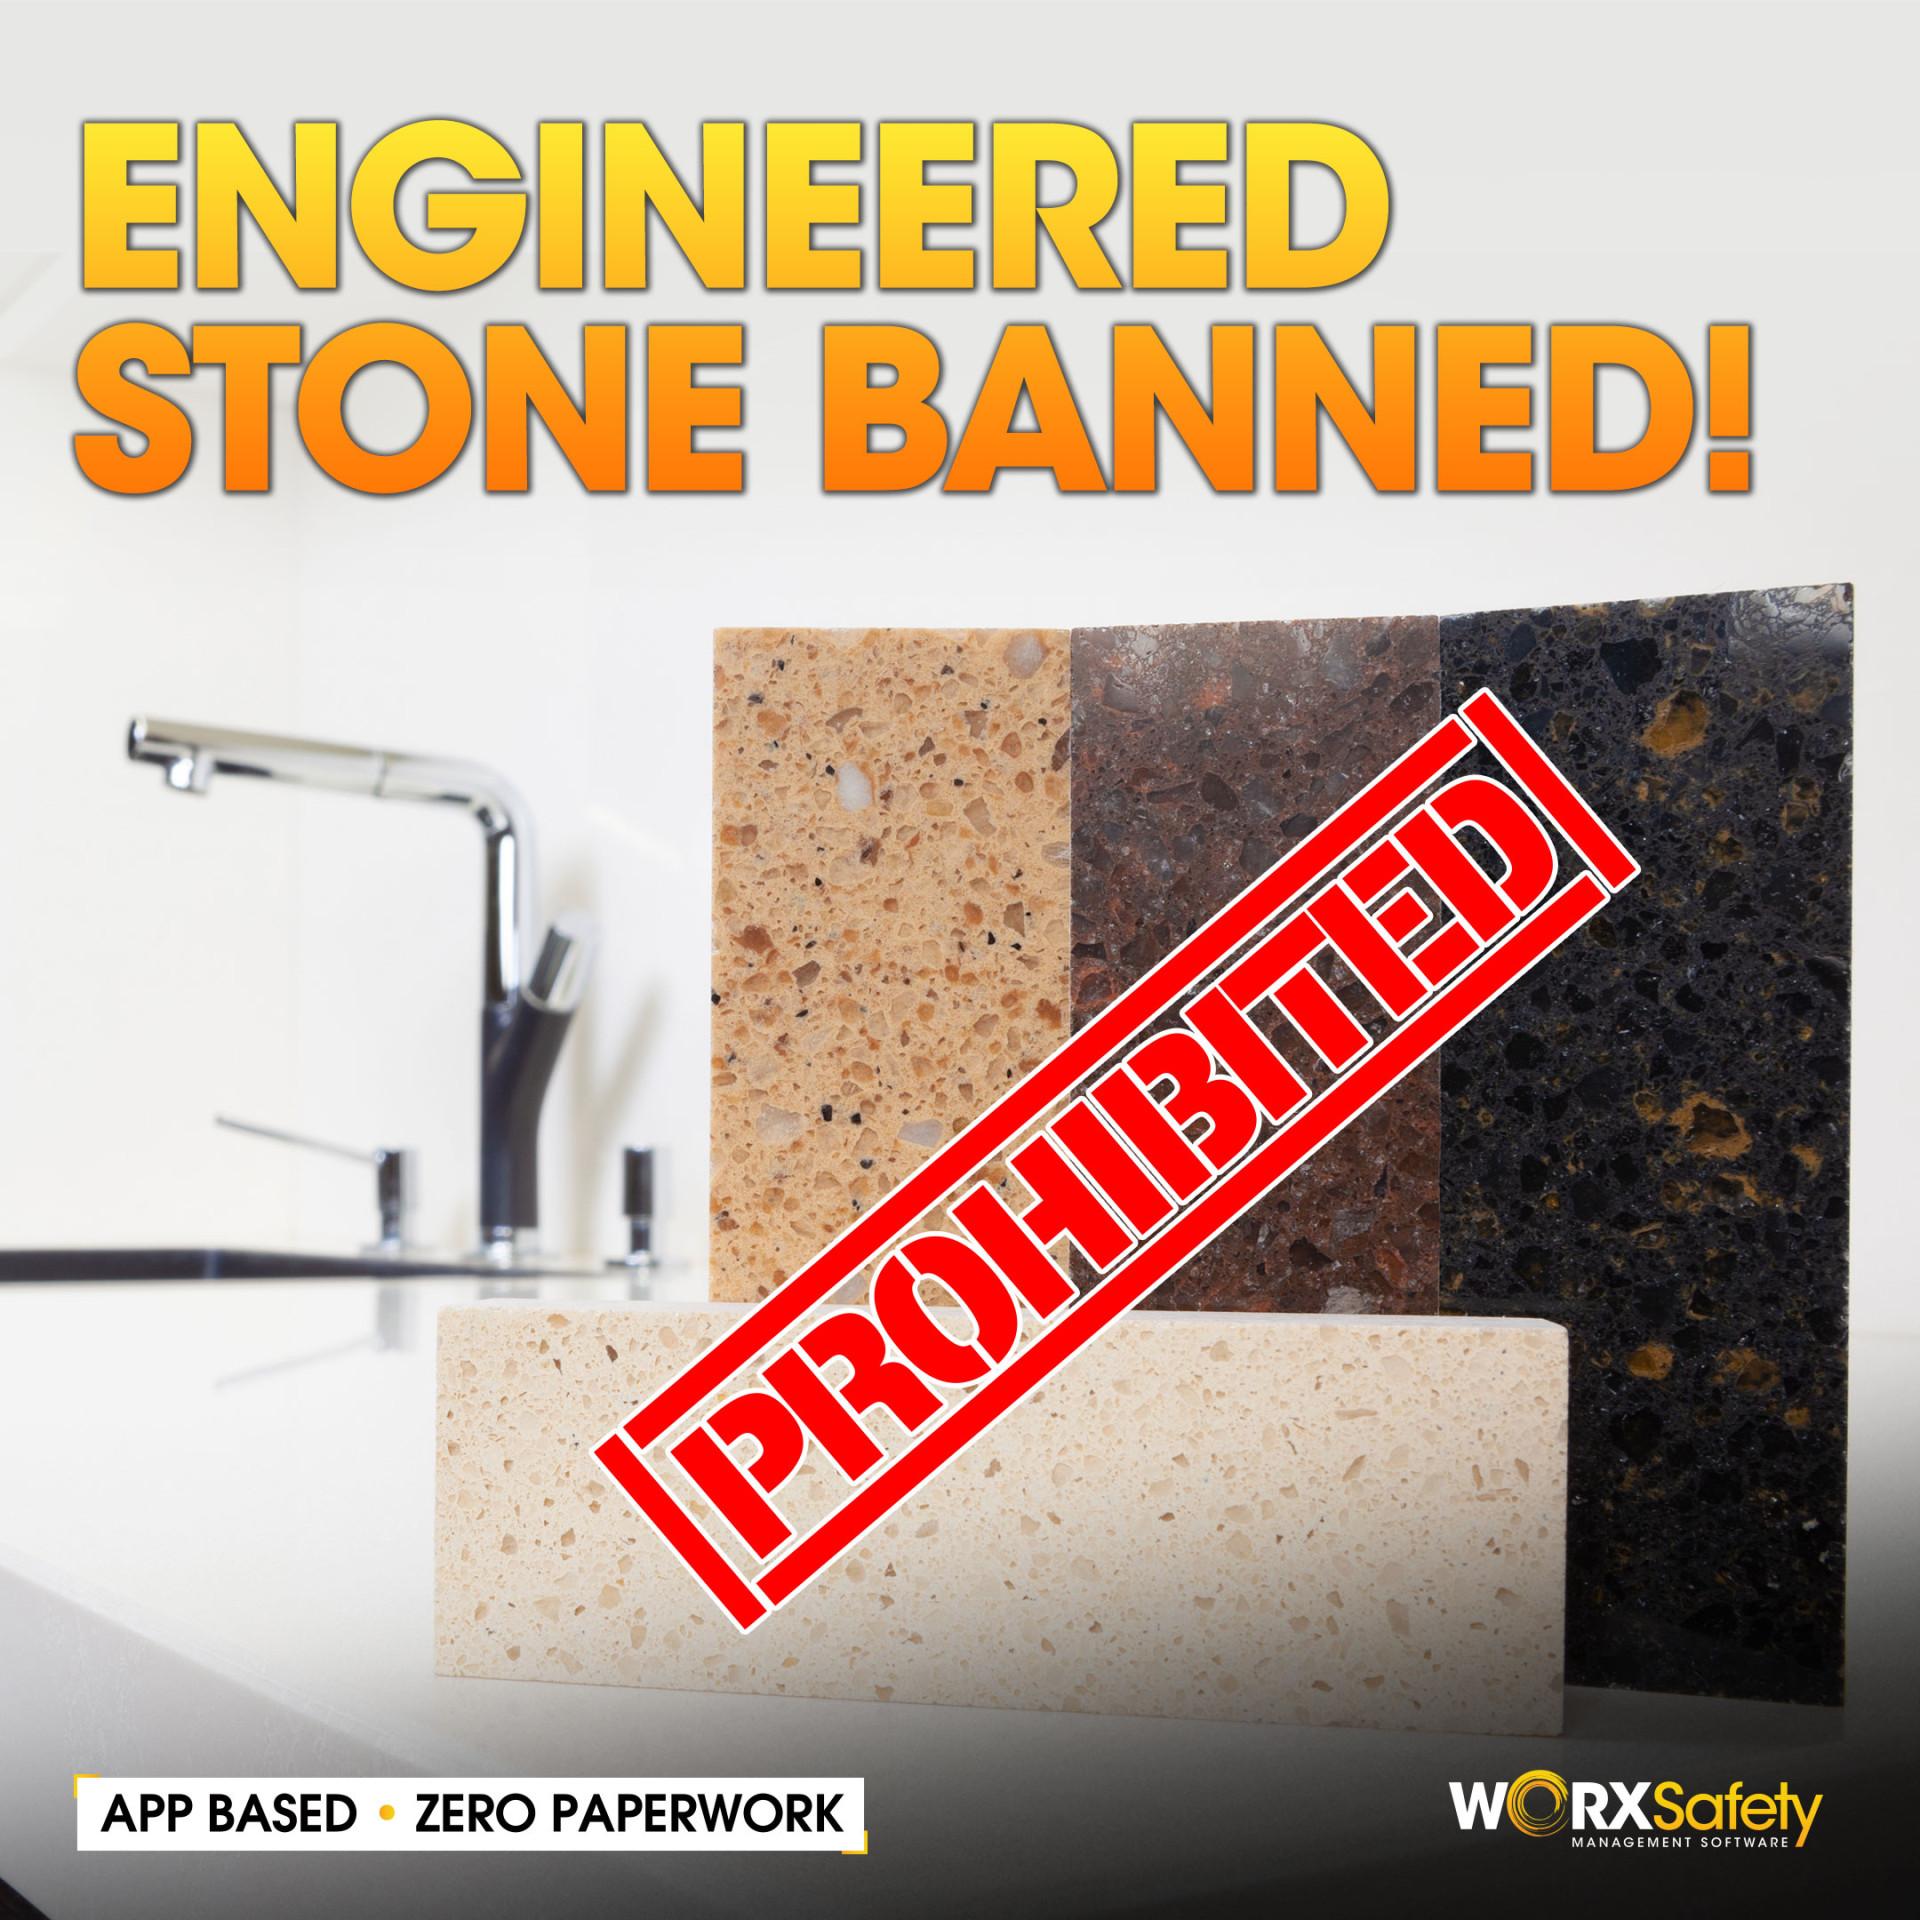 Australia Enacts Unprecedented Ban on Engineered Stone in Response to Escalating Silicosis Incidents